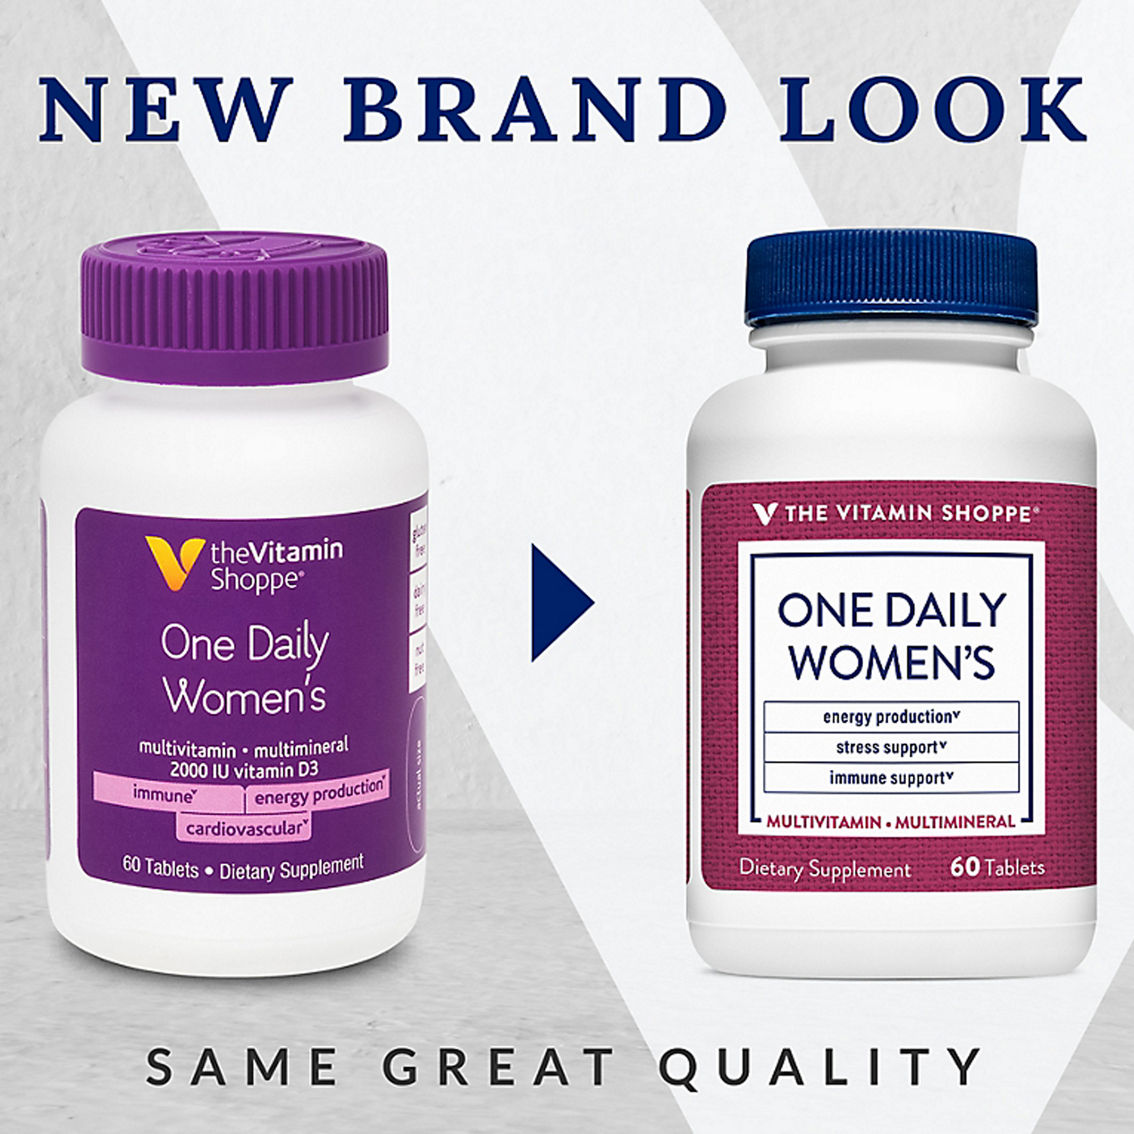 The Vitamin Shoppe Women's One Daily Multivitamin Tablets 60 ct. - Image 3 of 3